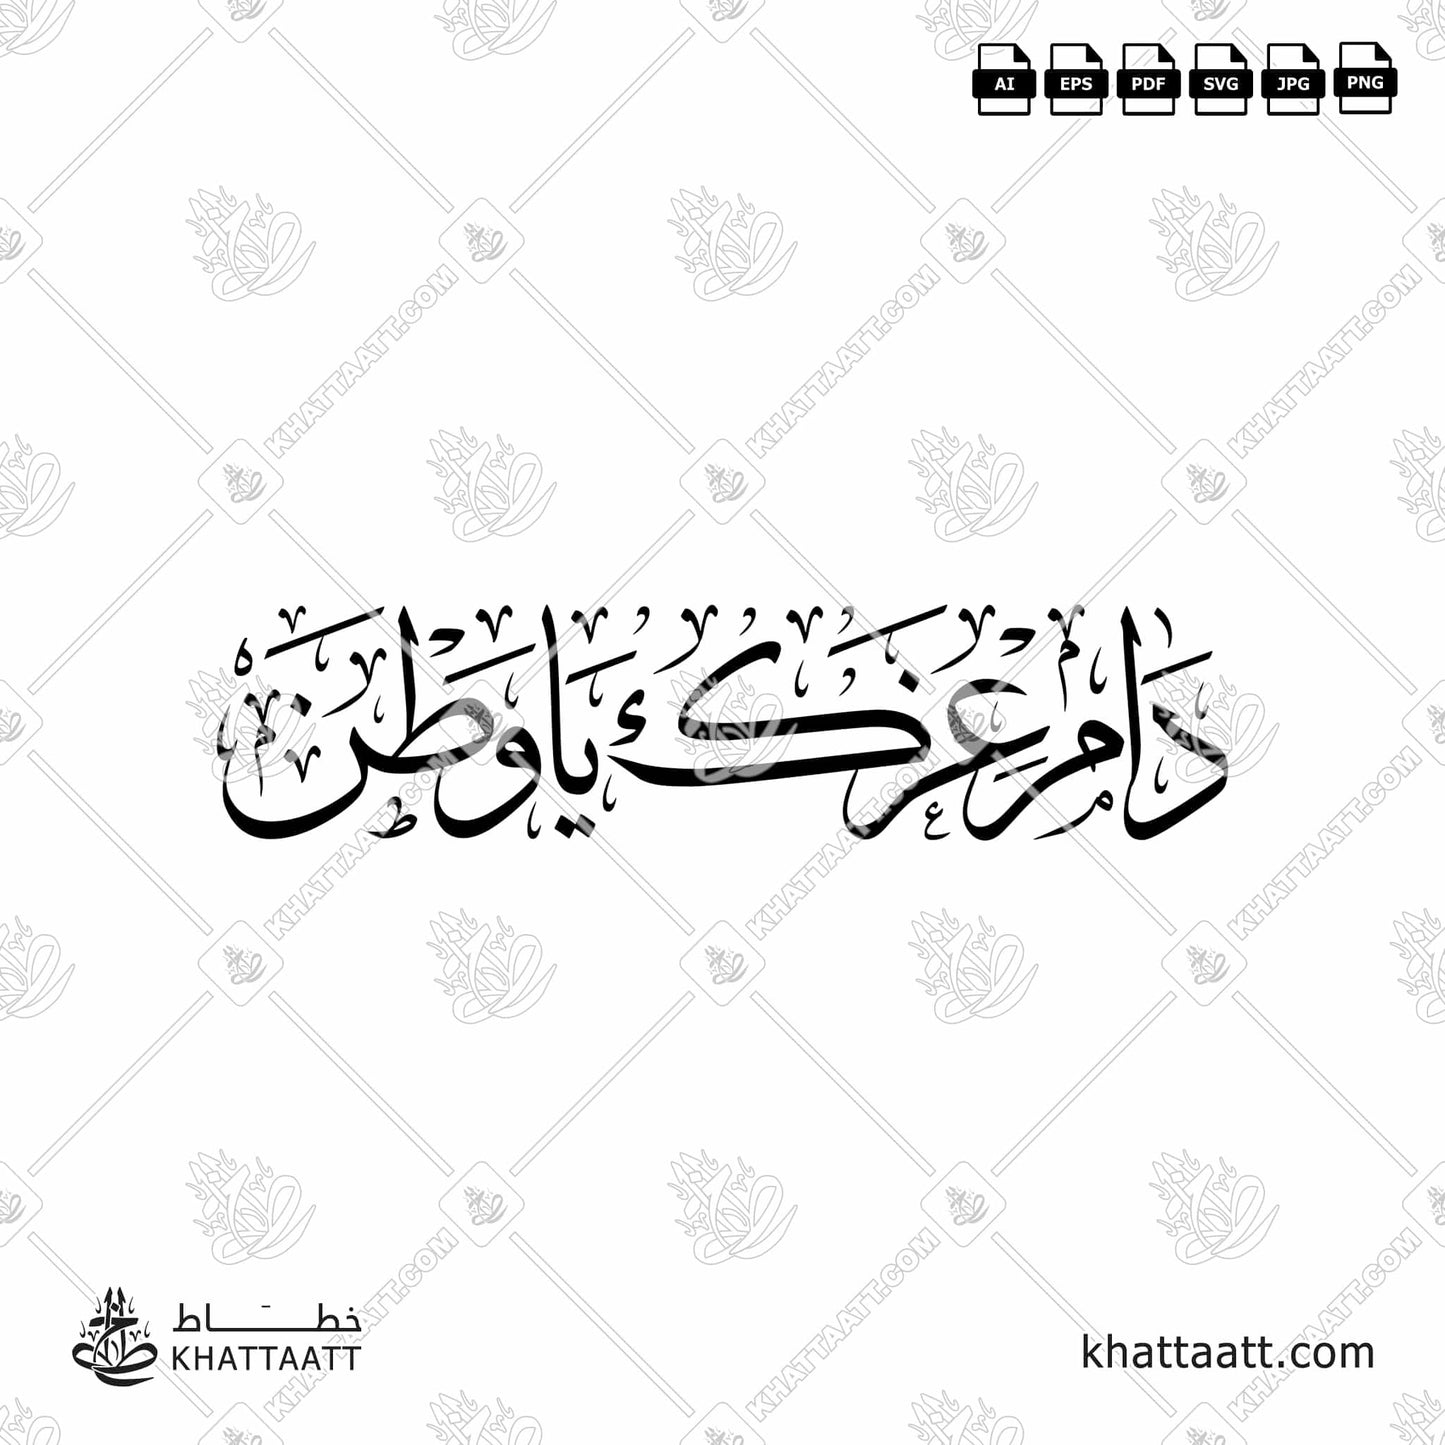 Download Arabic Calligraphy of دام عزك يا وطن - Thuluth in Thuluth - خط الثلث in vector and .png